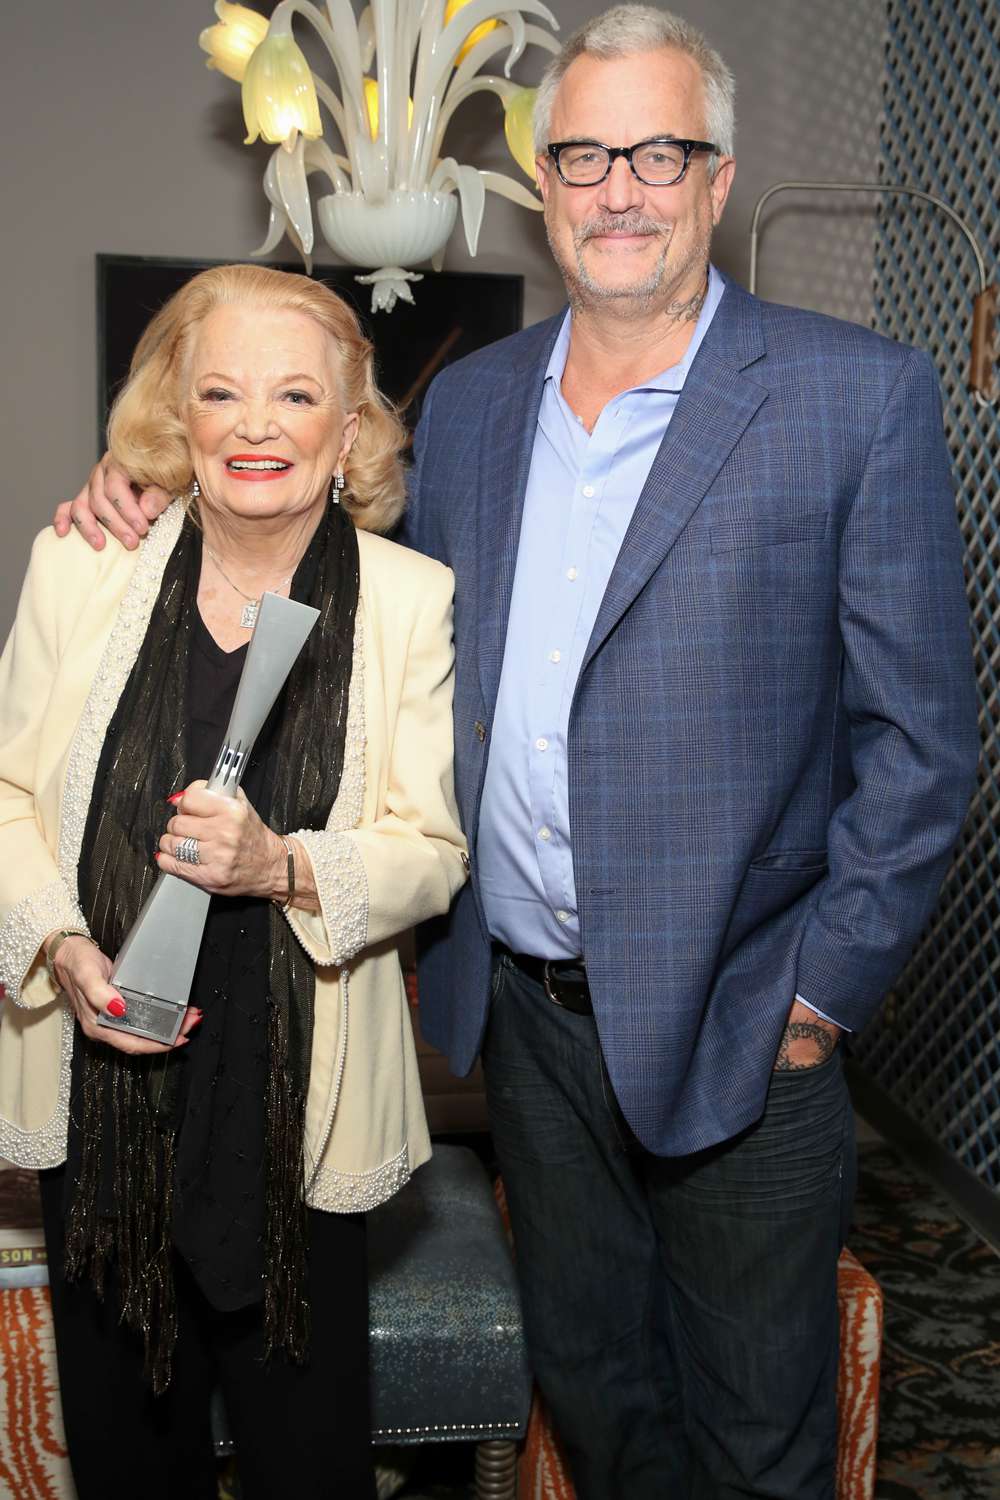 Actress Gena Rowlands and Nick Cassavetes attend the 17th Annual Savannah Film Festival on October 30, 2014 in Savannah, Georgia.